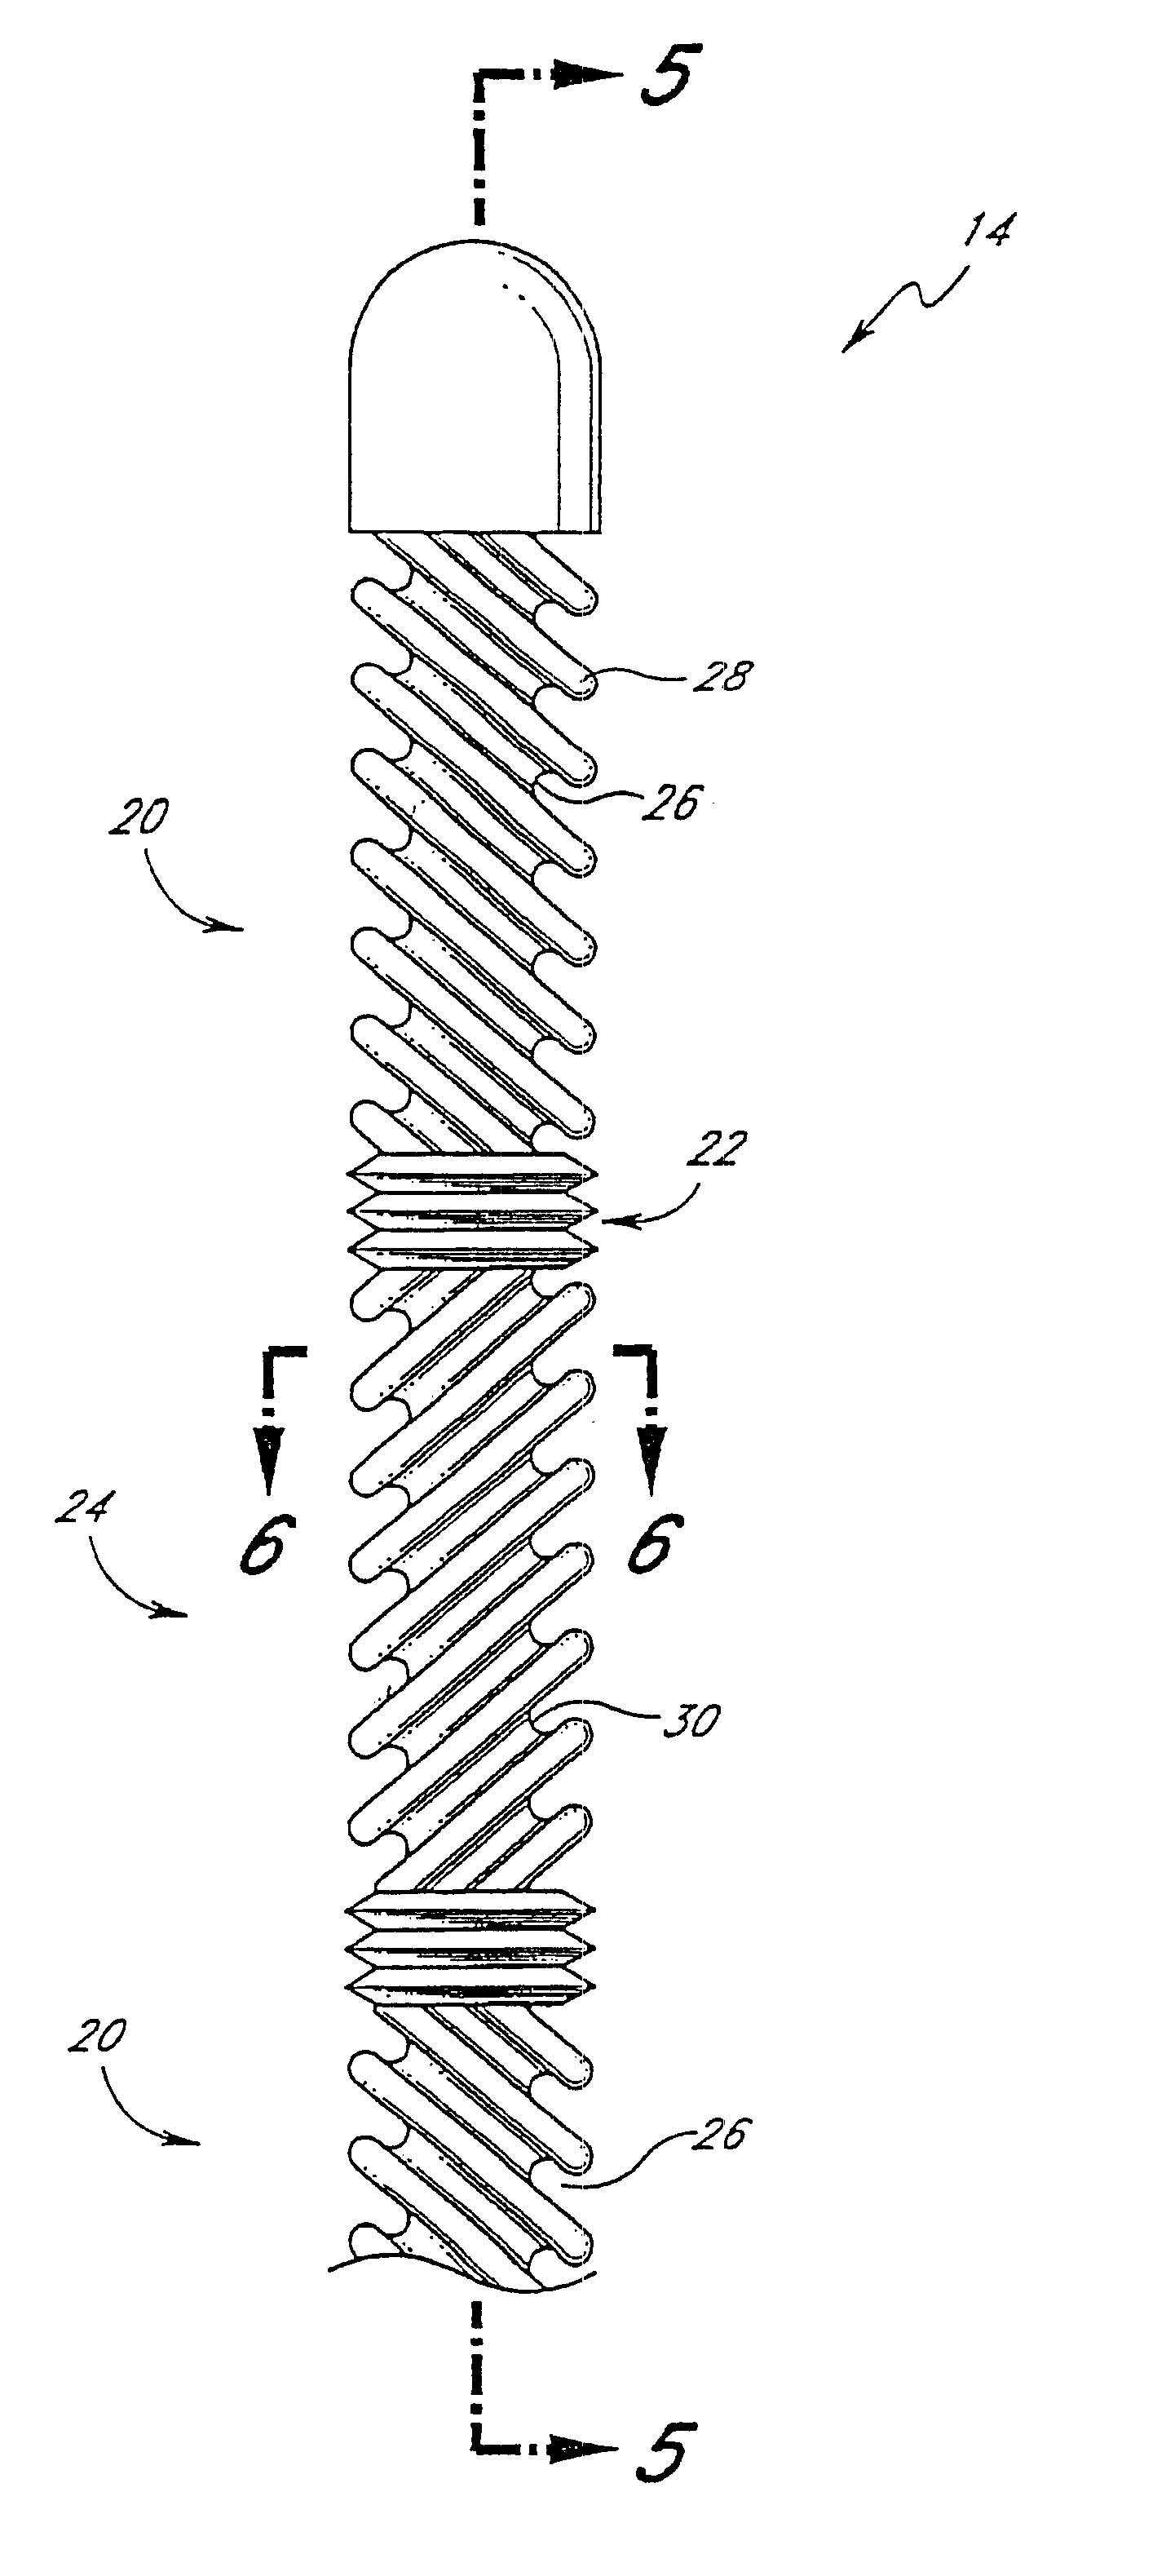 Method for determining the effective thermal mass of a body or organ using a cooling catheter